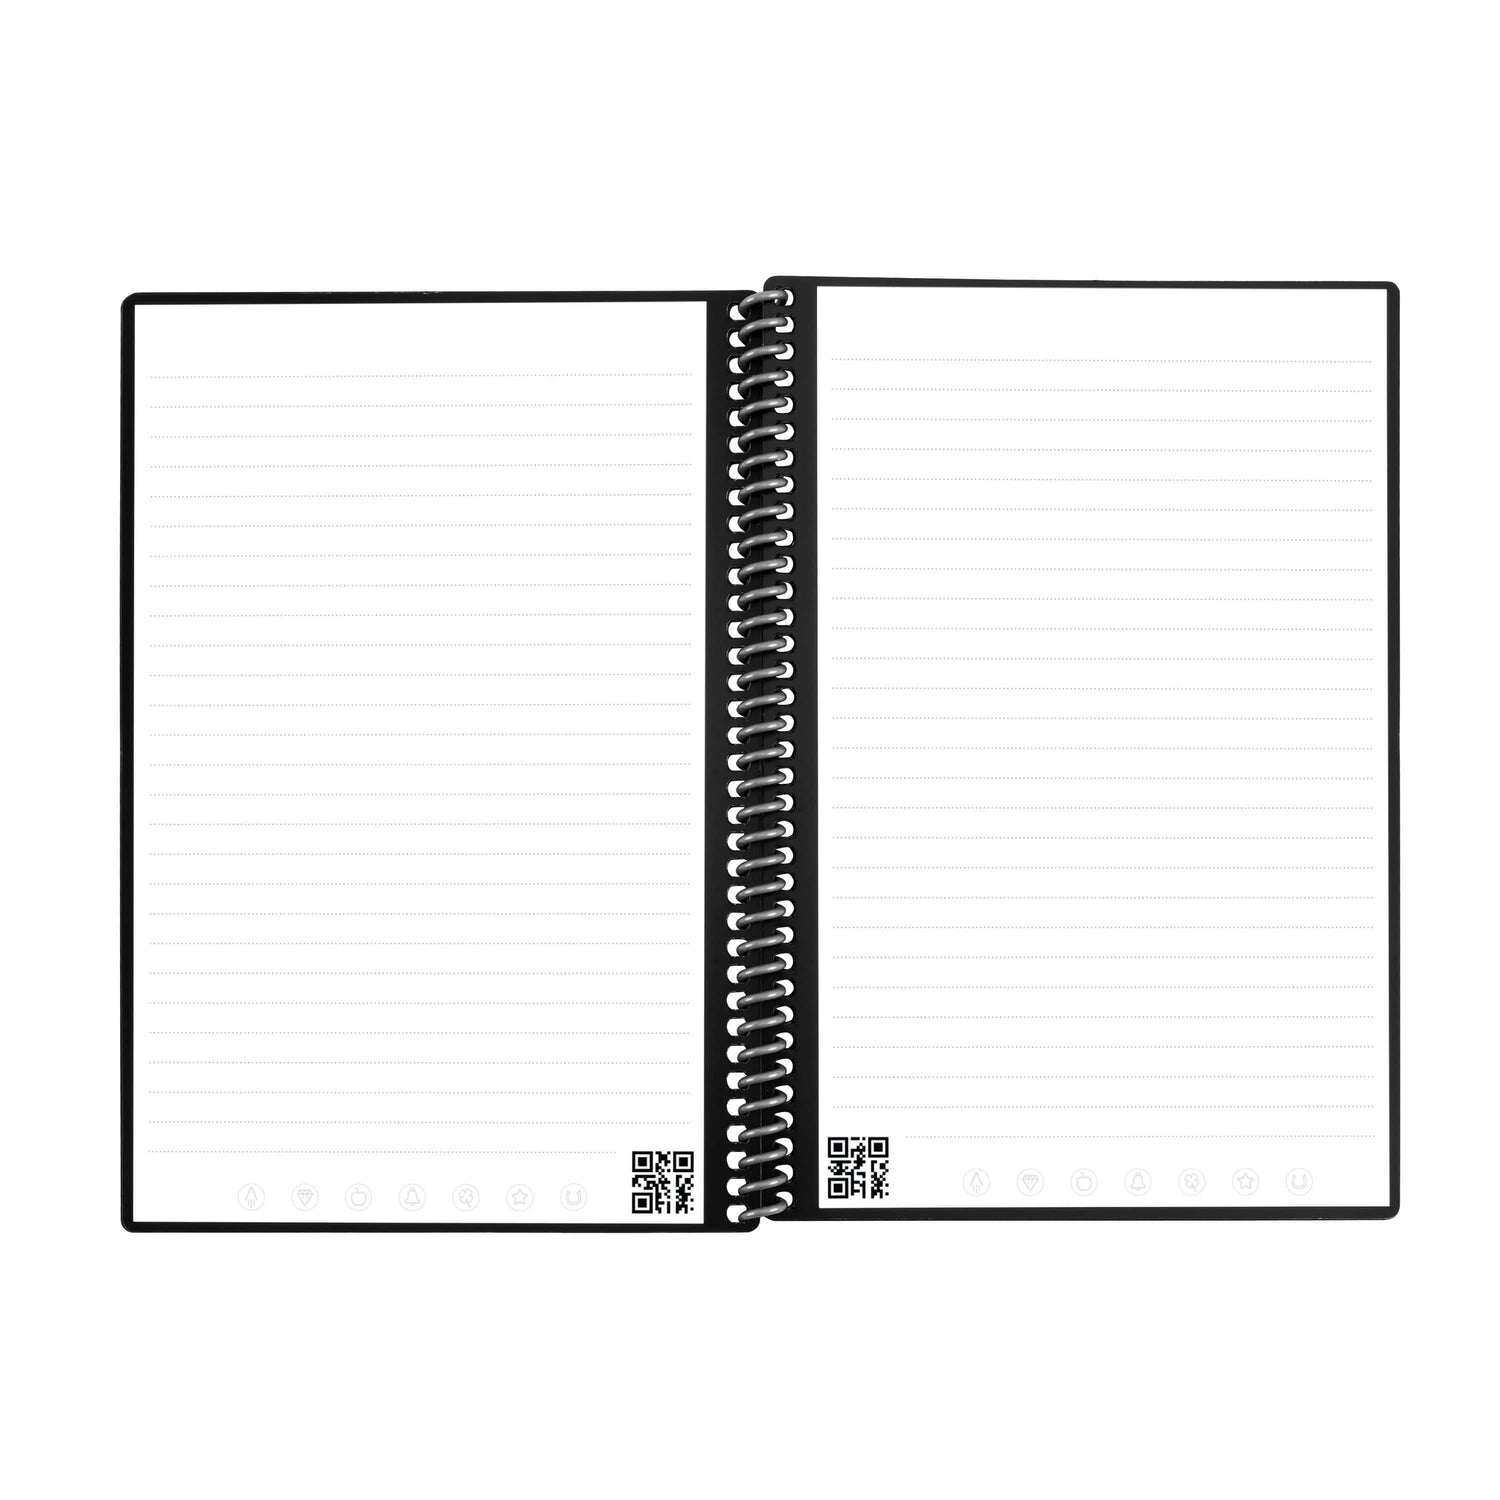 12 Pocket Bound Presentation Book, Black with Clear View Front Cover, 24 Sheet Protector Pages, 8.5 x 11 Sheets, by Better Office Products, Art